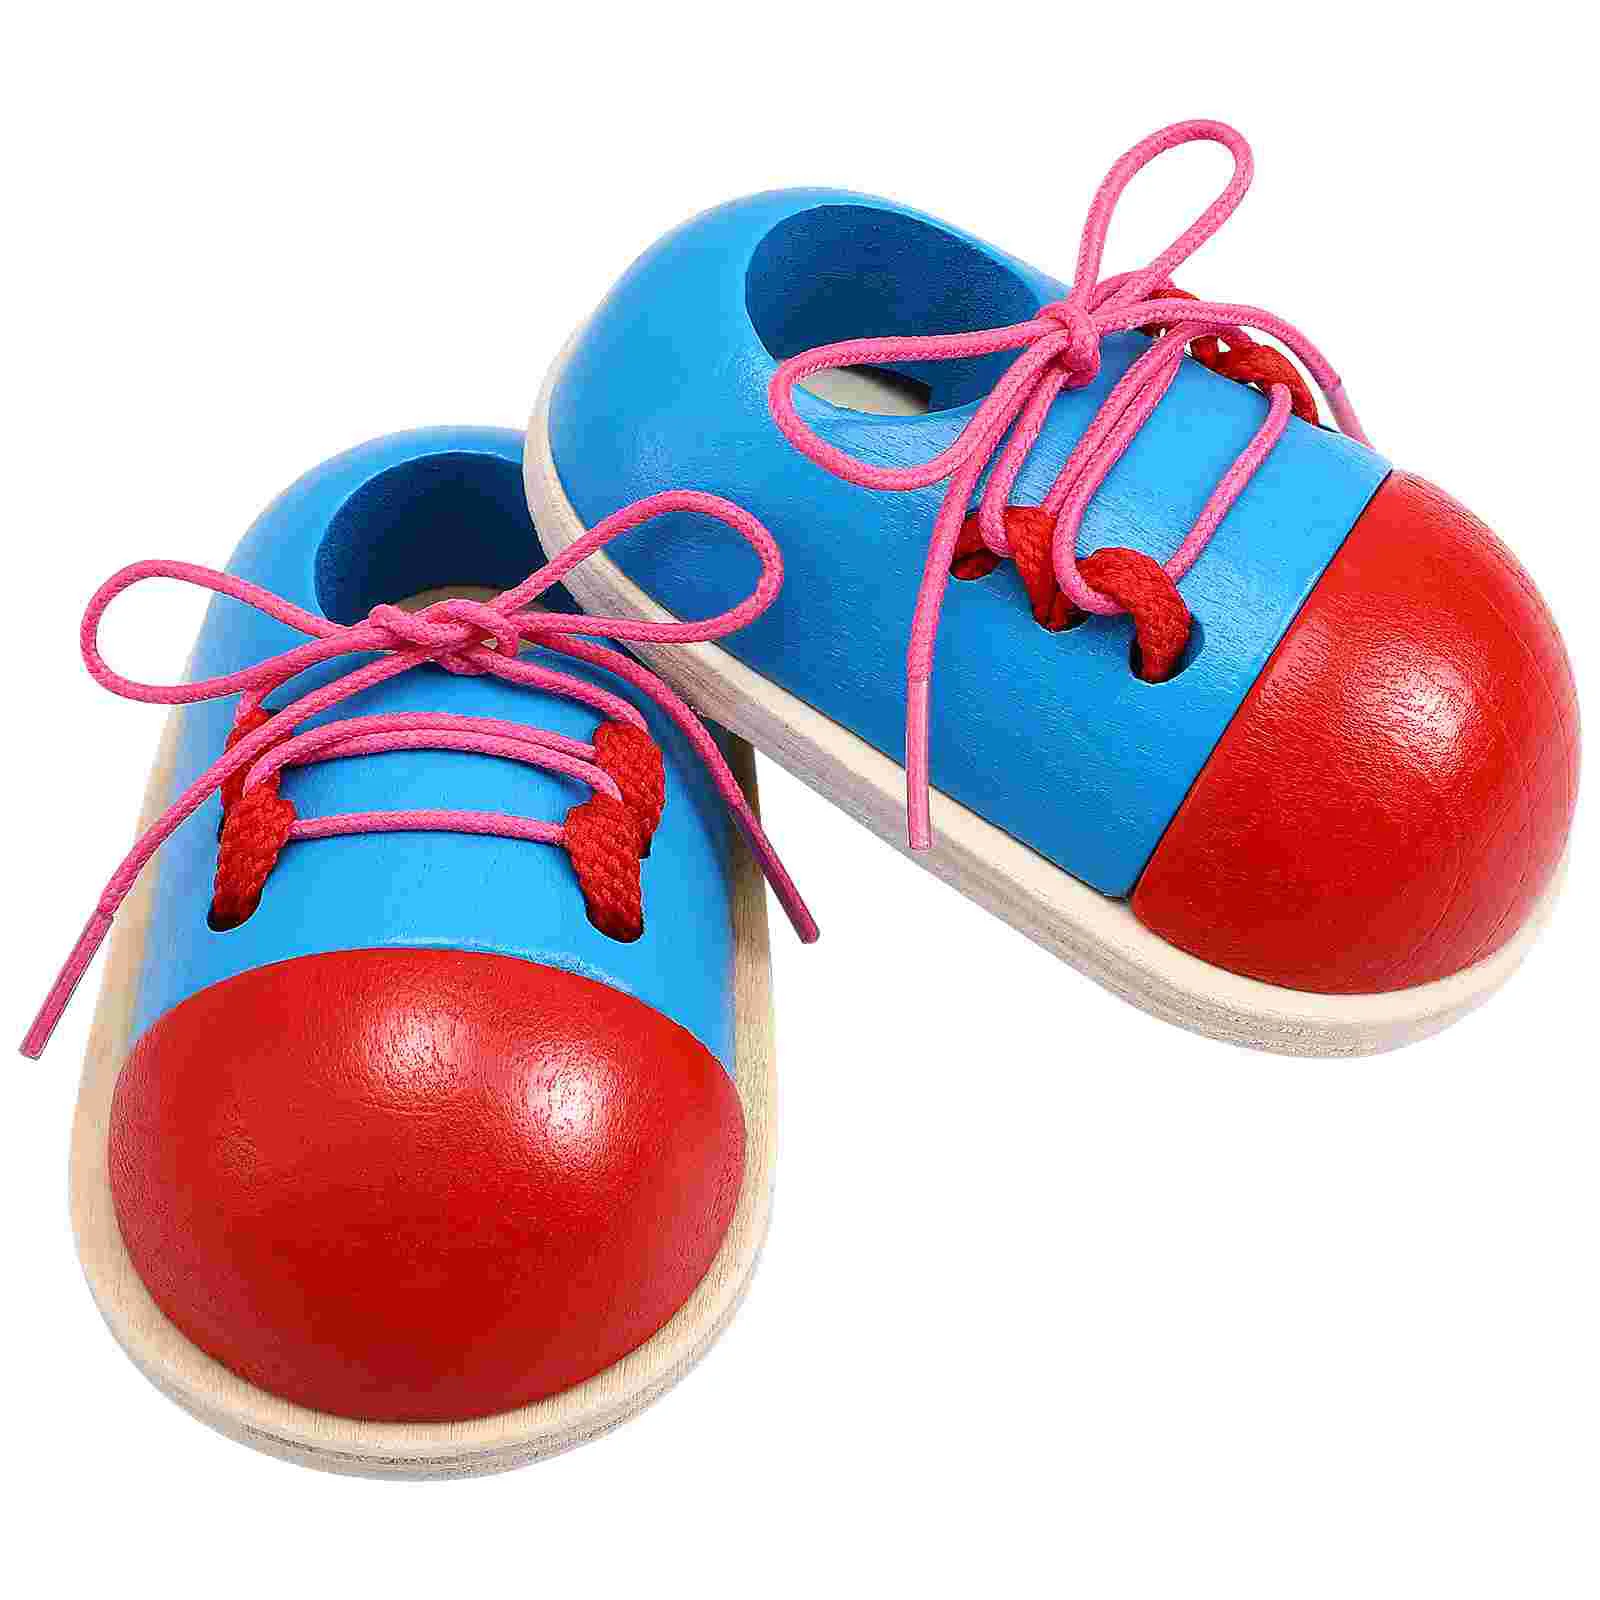 

2 Pcs Shoe Trying Practice Toys Wooden Shoelace Threading Teaching Game Playthings for Toddlers Kids